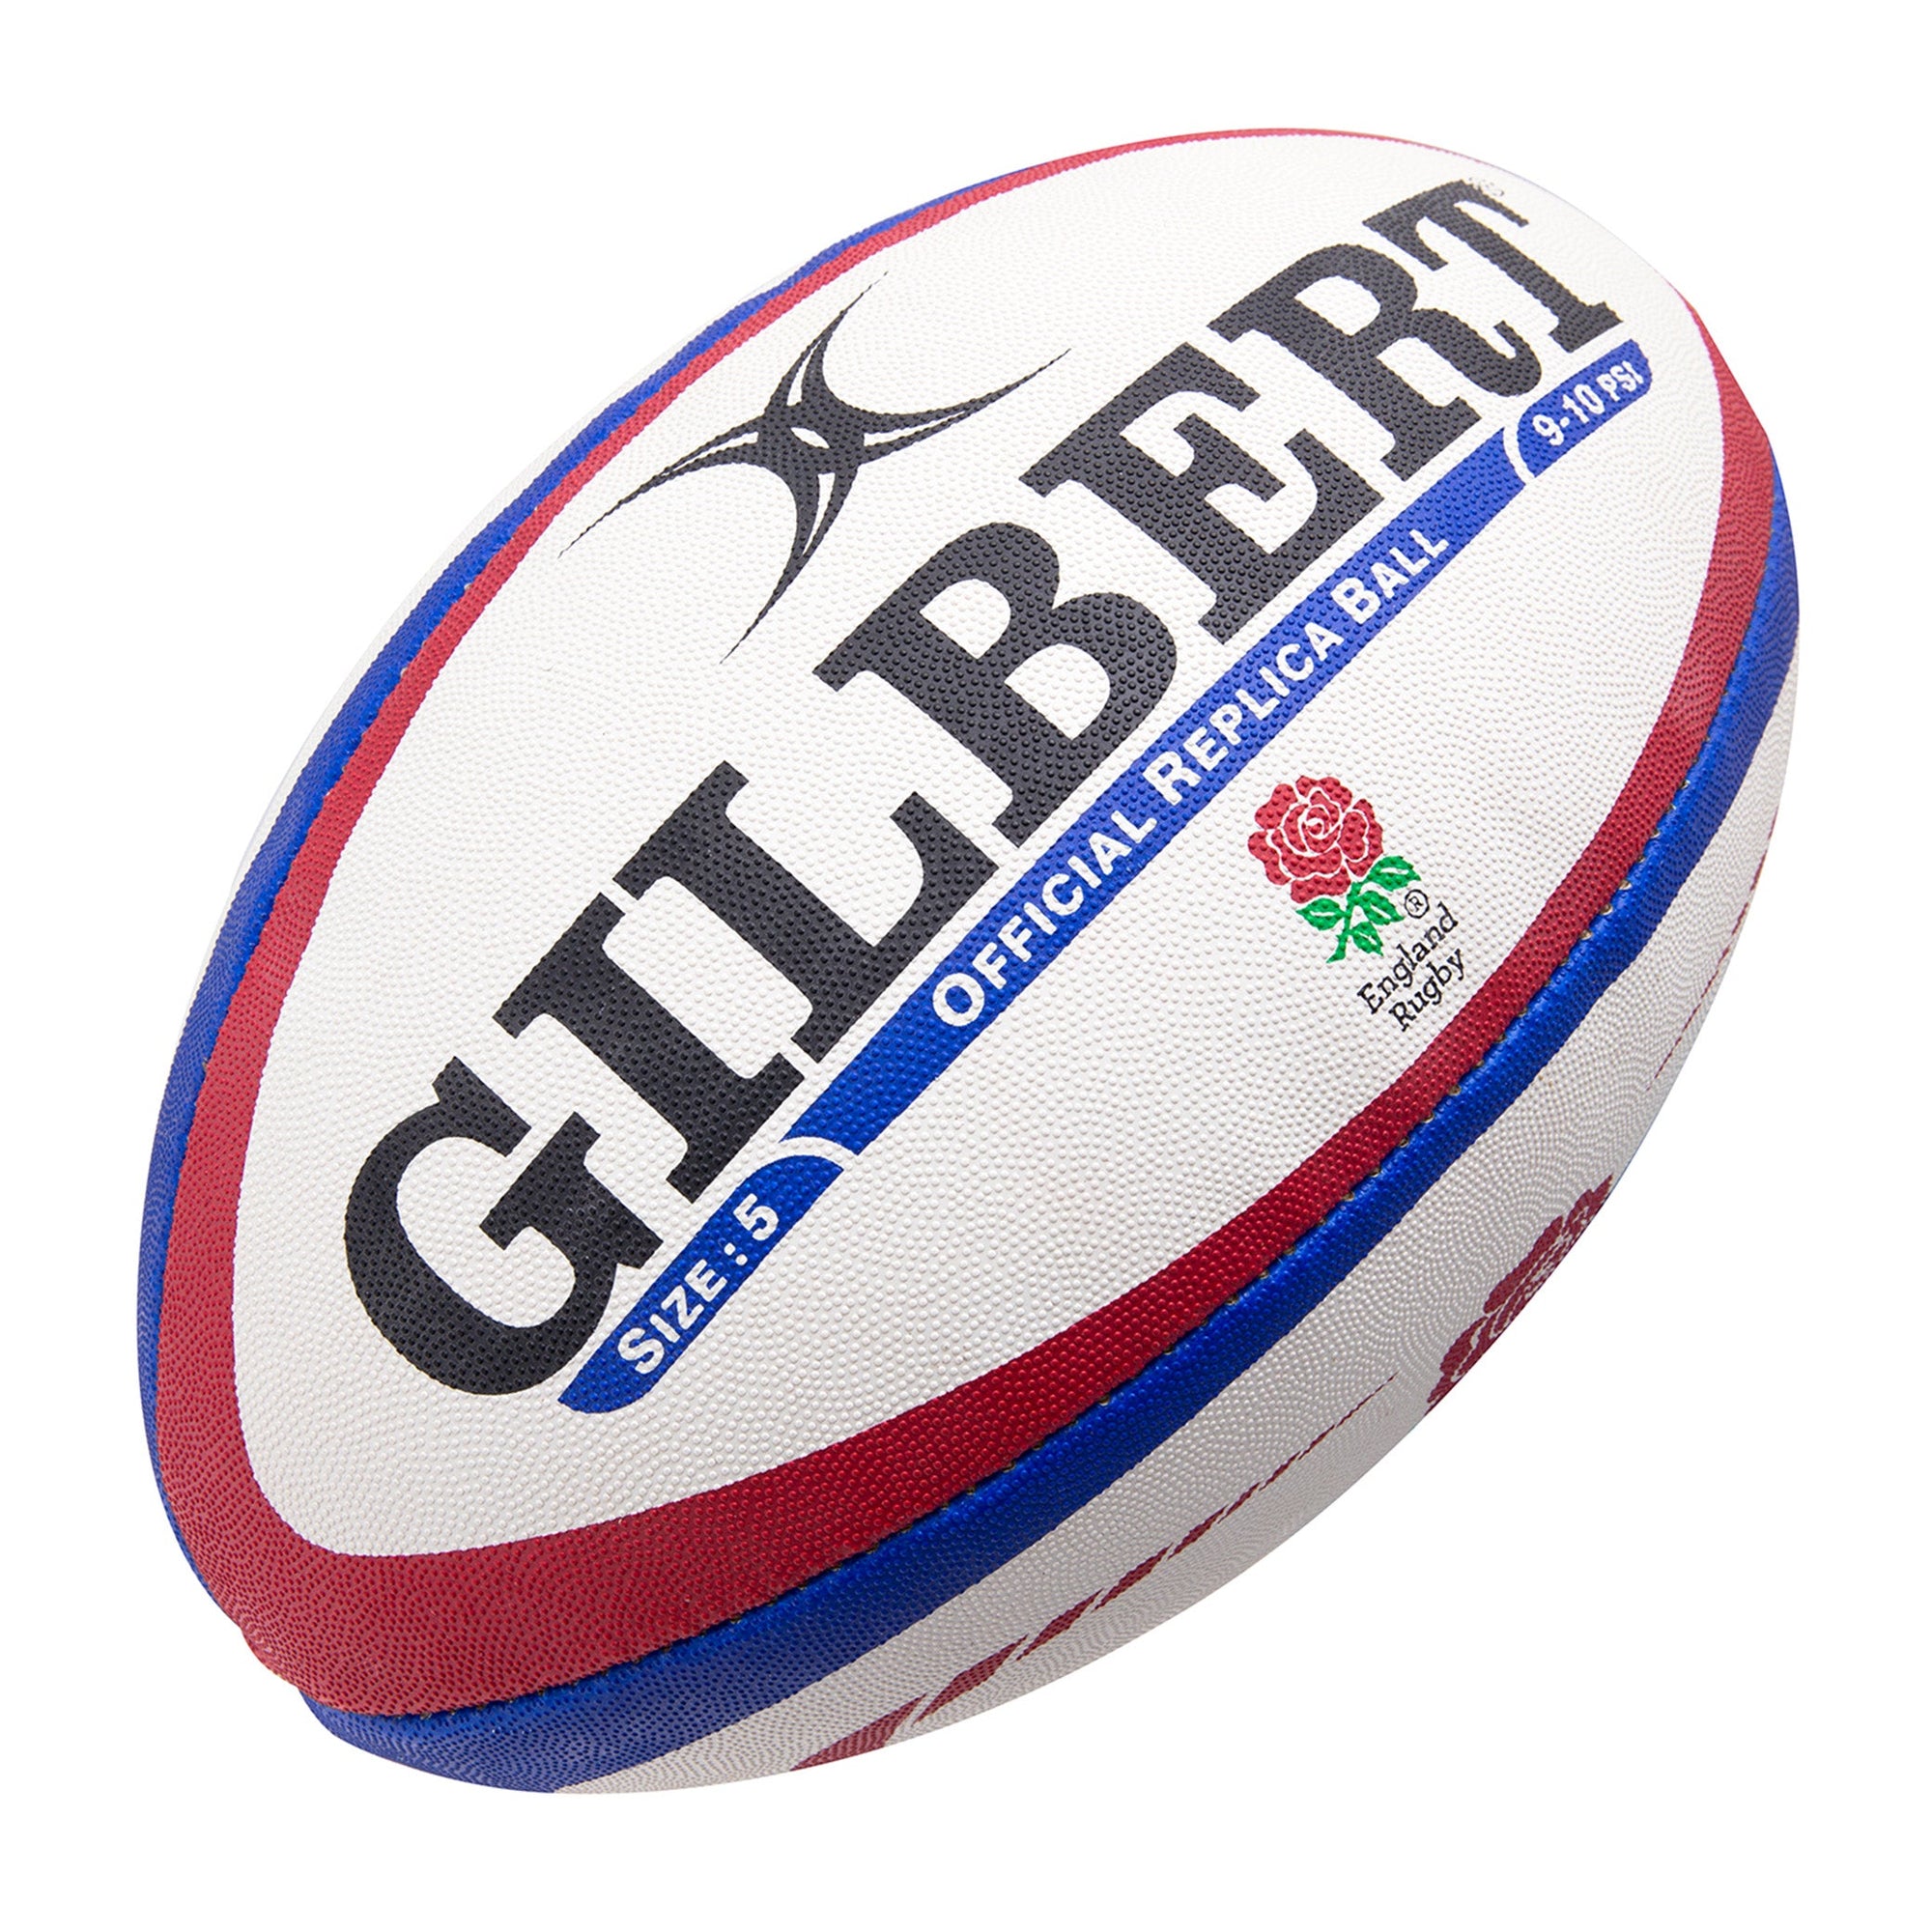 Rugby Imports Gilbert England Replica Rugby Ball '22